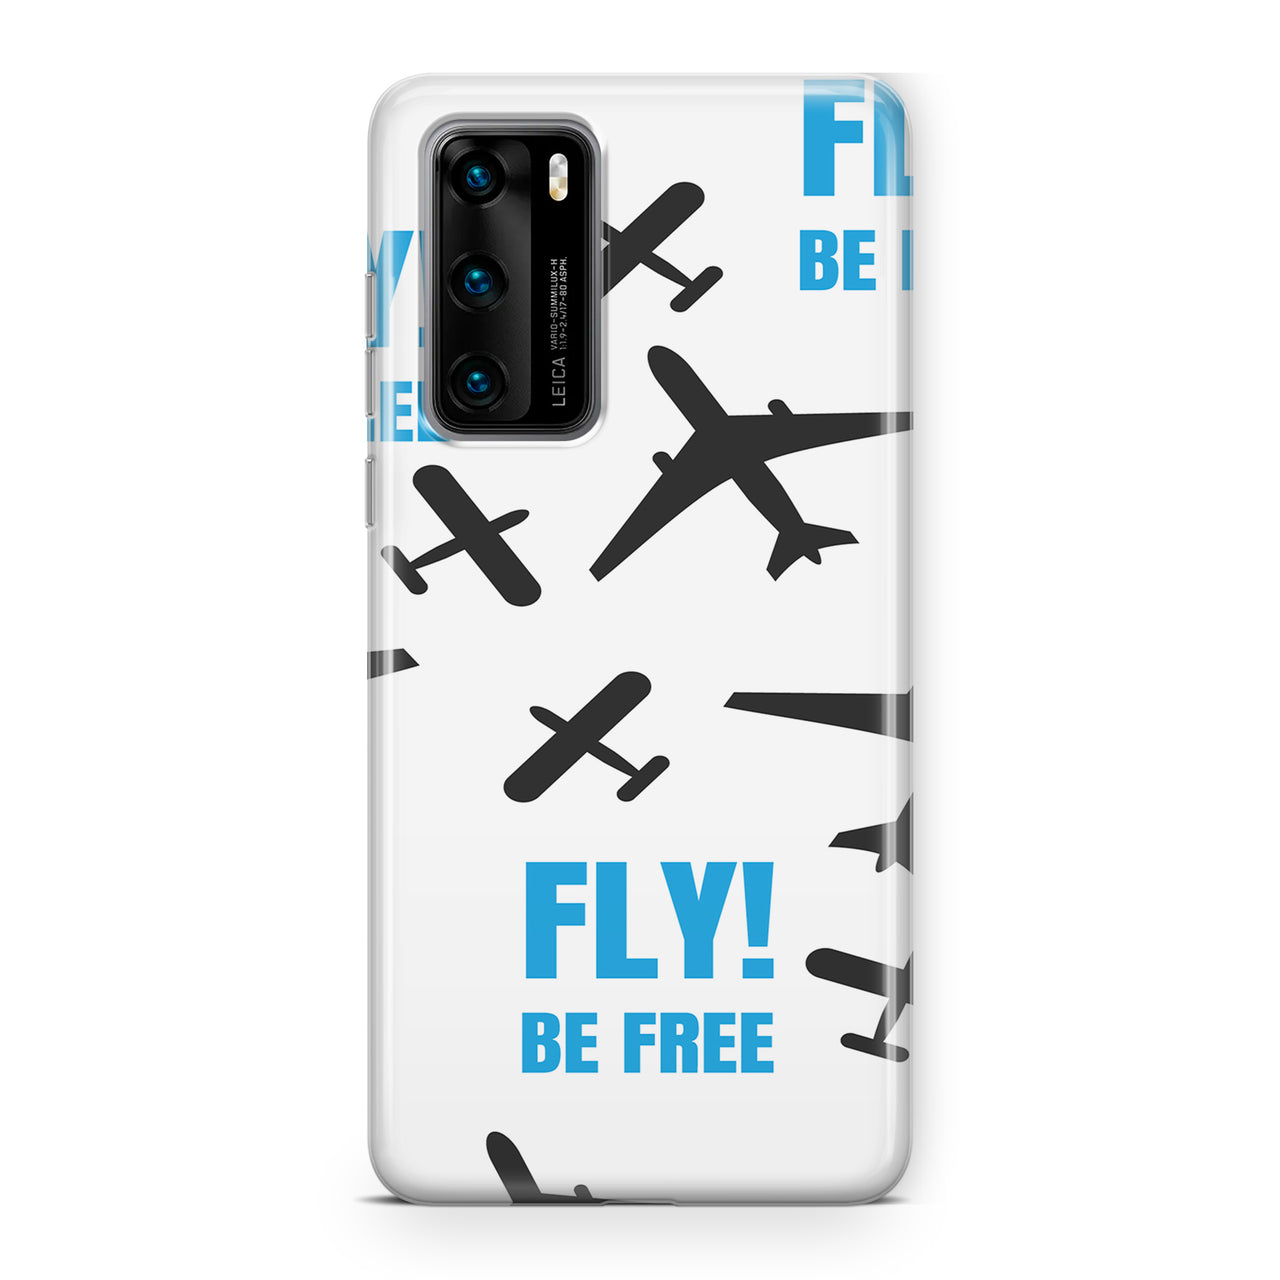 Fly Be Free White Designed Huawei Cases